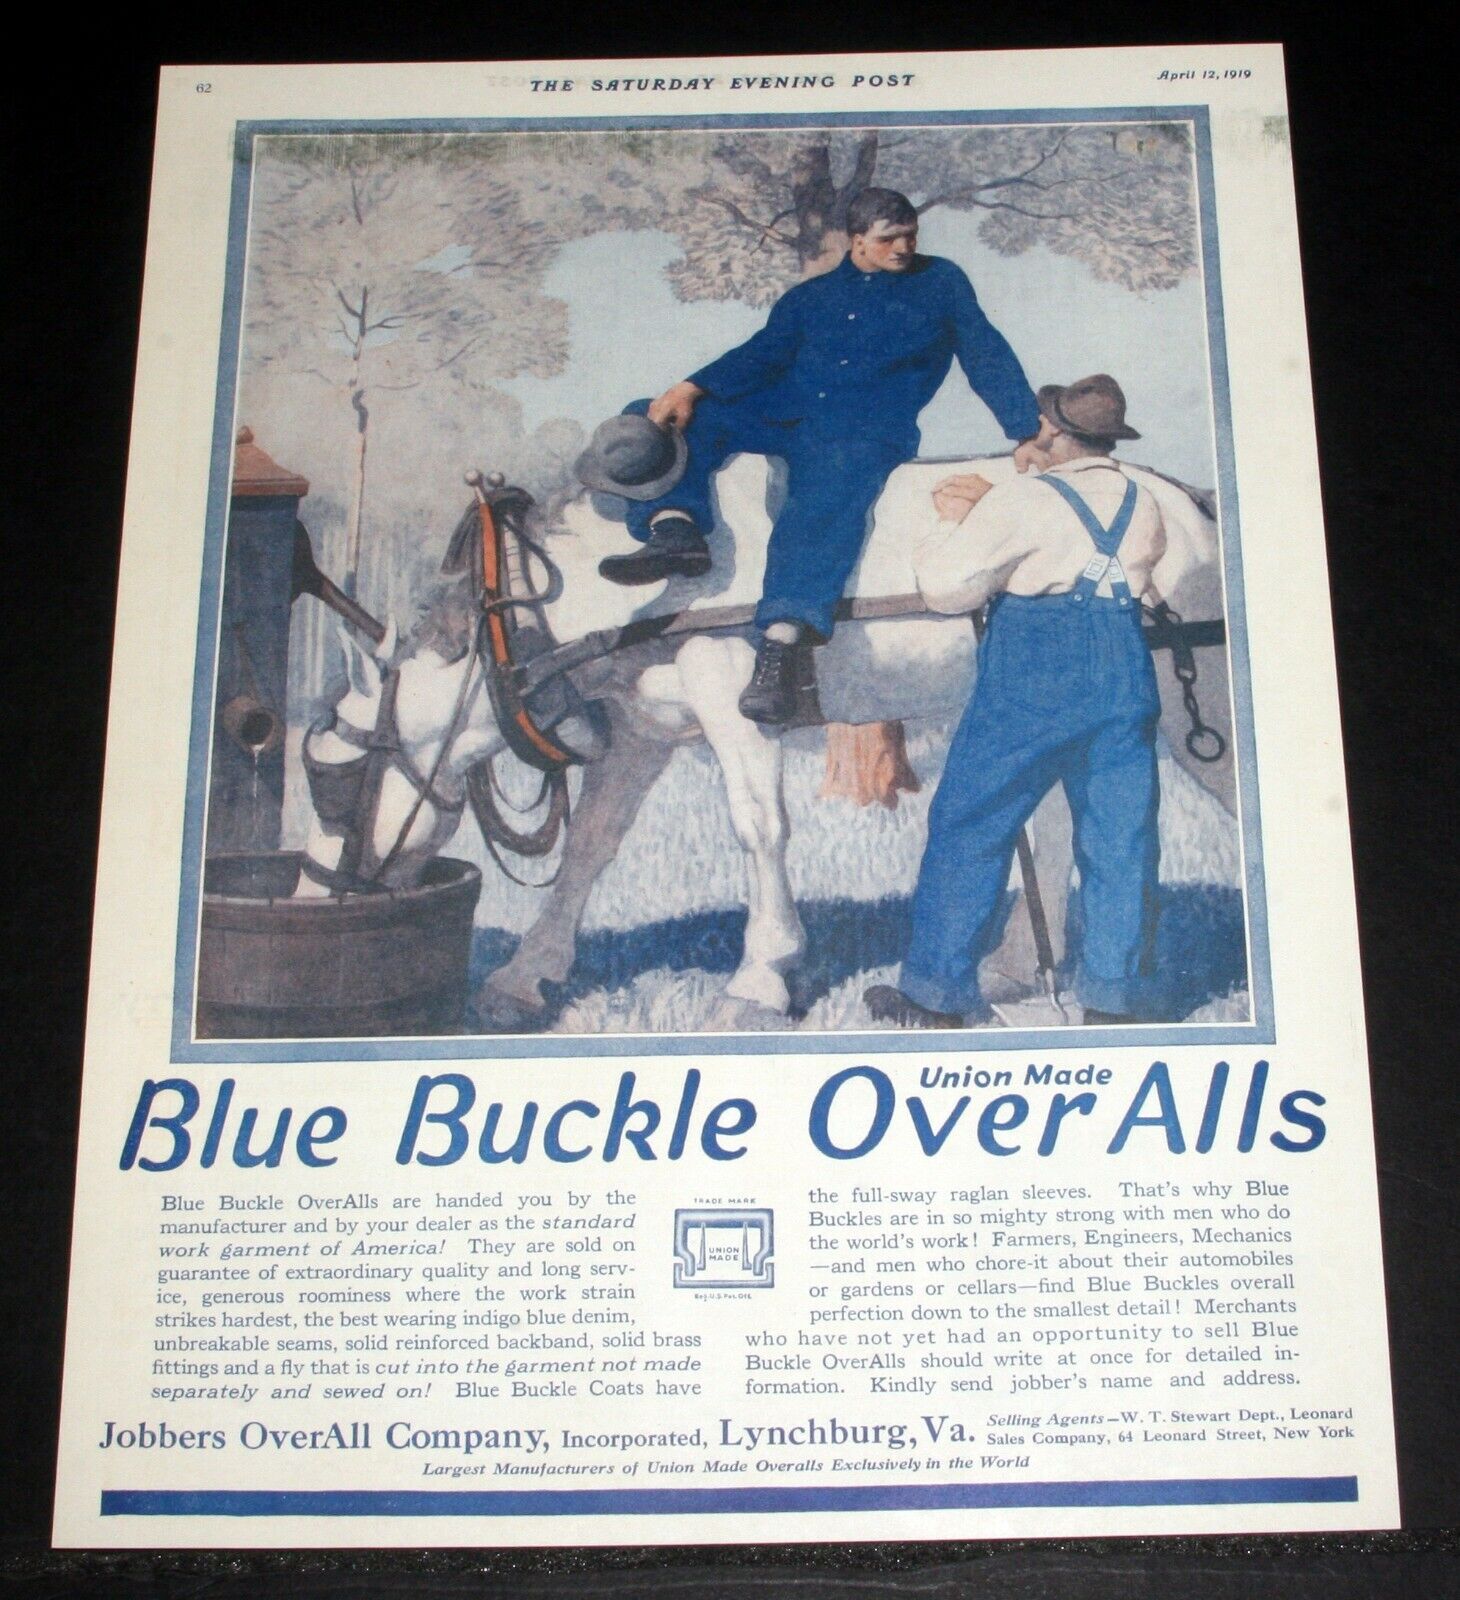 1919 OLD MAGAZINE PRINT AD, BLUE BUCKLE UNION MADE OVER ALLS, FOR LONG SERVICE